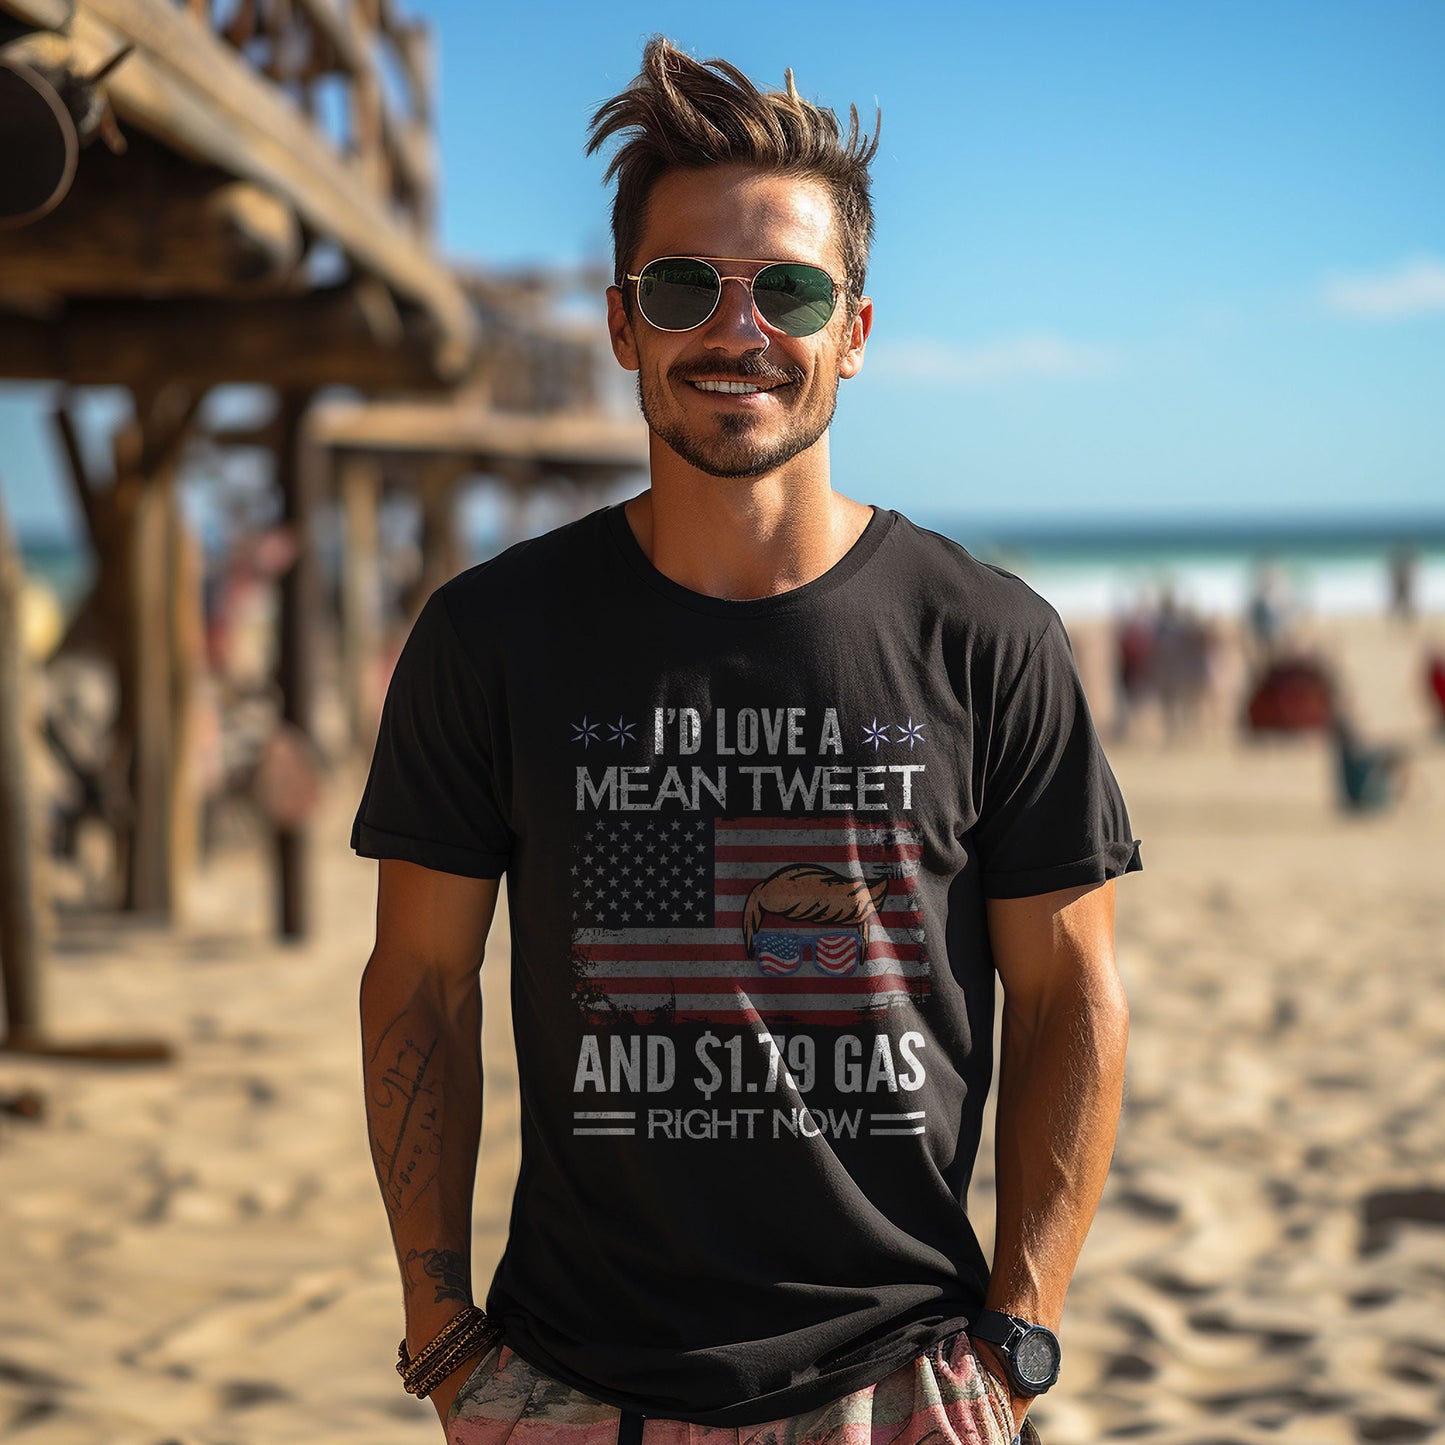 Trump I'd Love a Mean Tweet and $1.79 Gas Right Now Premium Short Sleeve T-Shirt